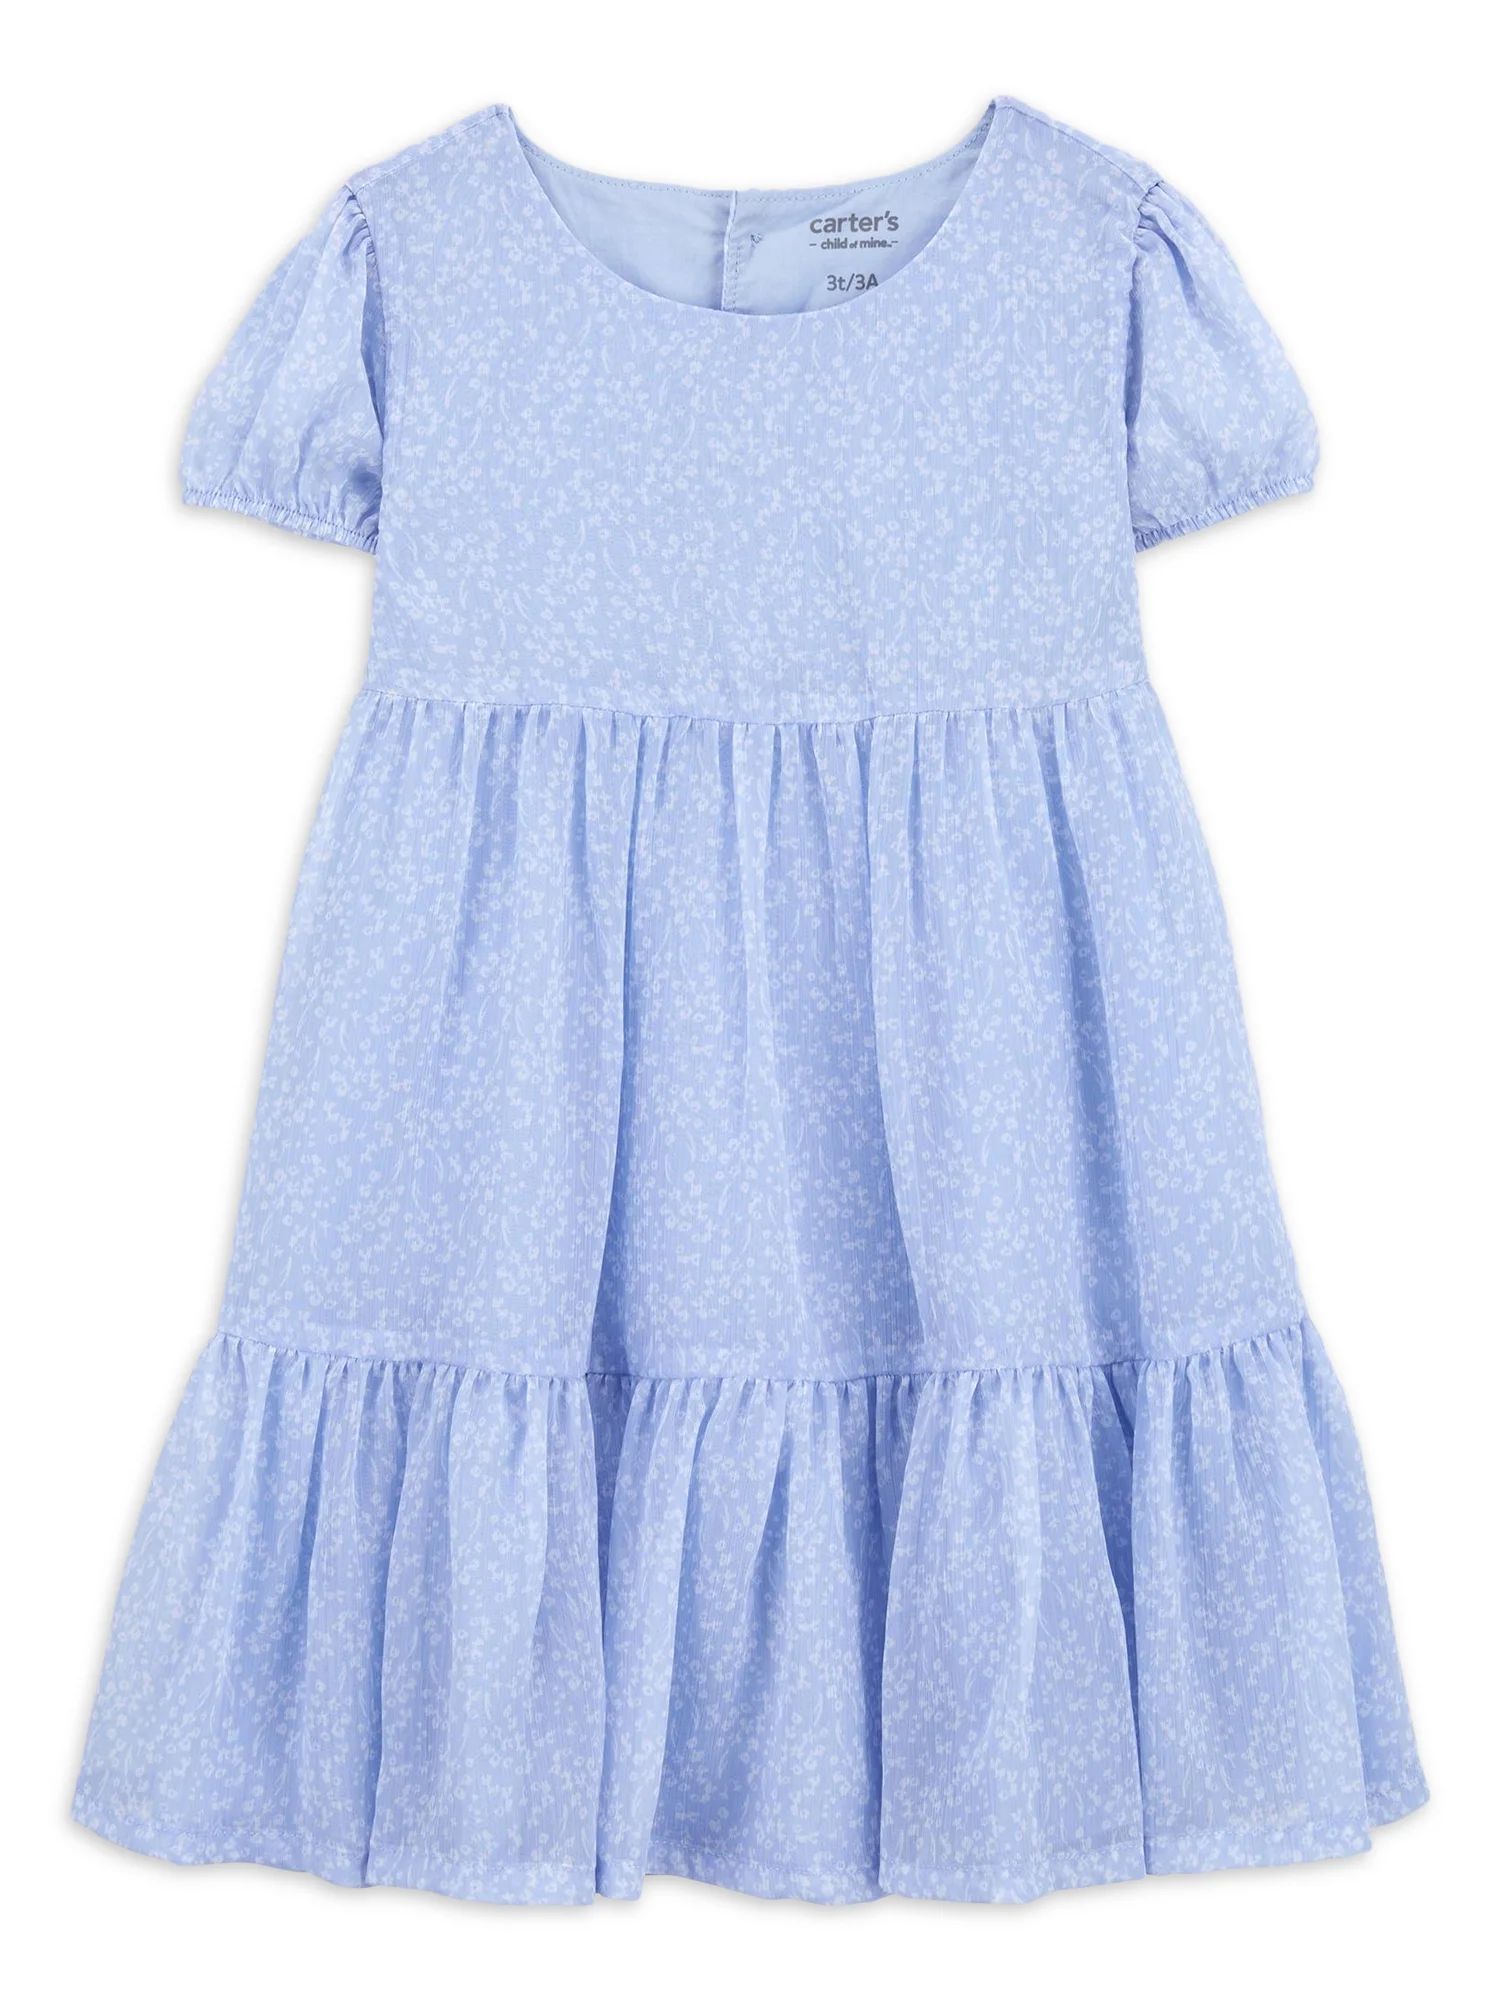 Carter's Child of Mine Toddler Girl Dress, One-Piece, Sizes 2T-5T | Walmart (US)